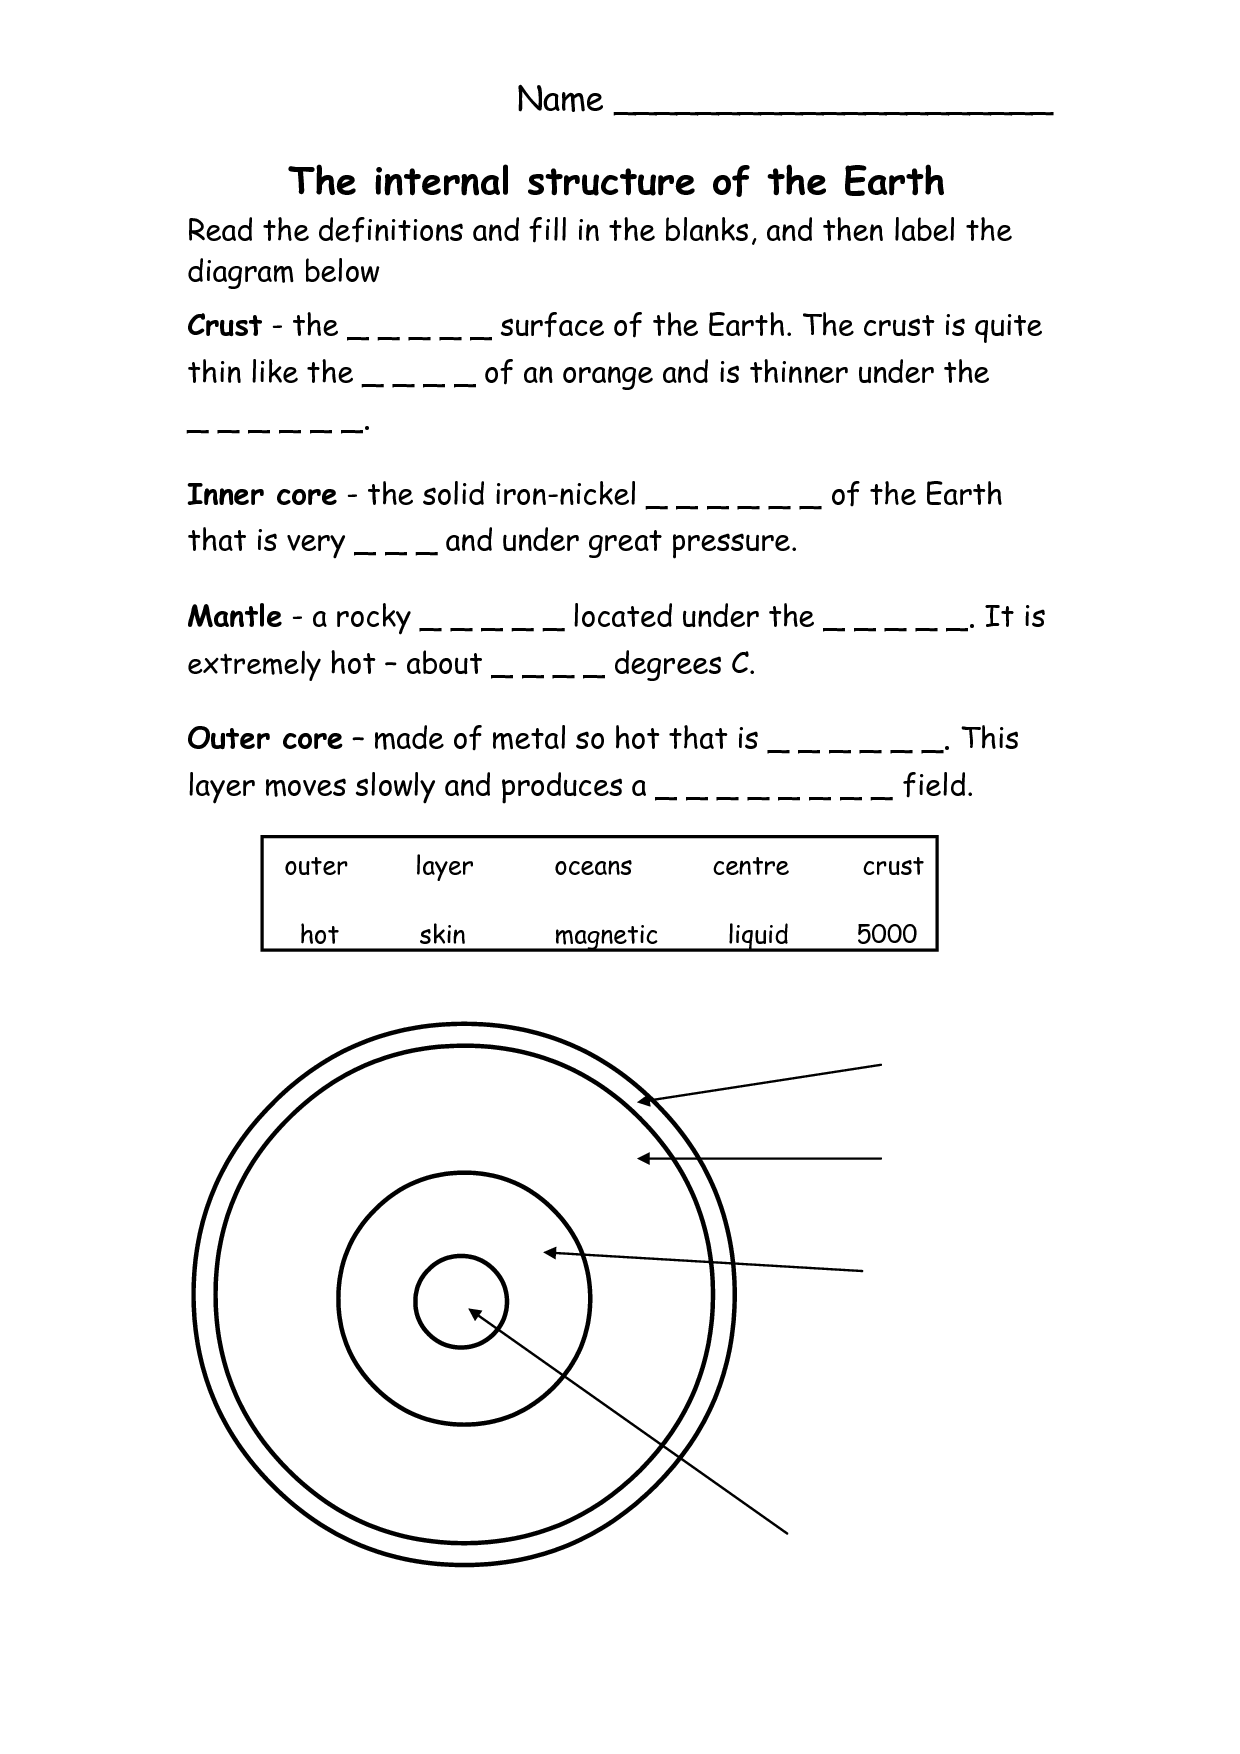 13 Best Images of Anatomy Of A Volcano Worksheet - Parts of a Volcano